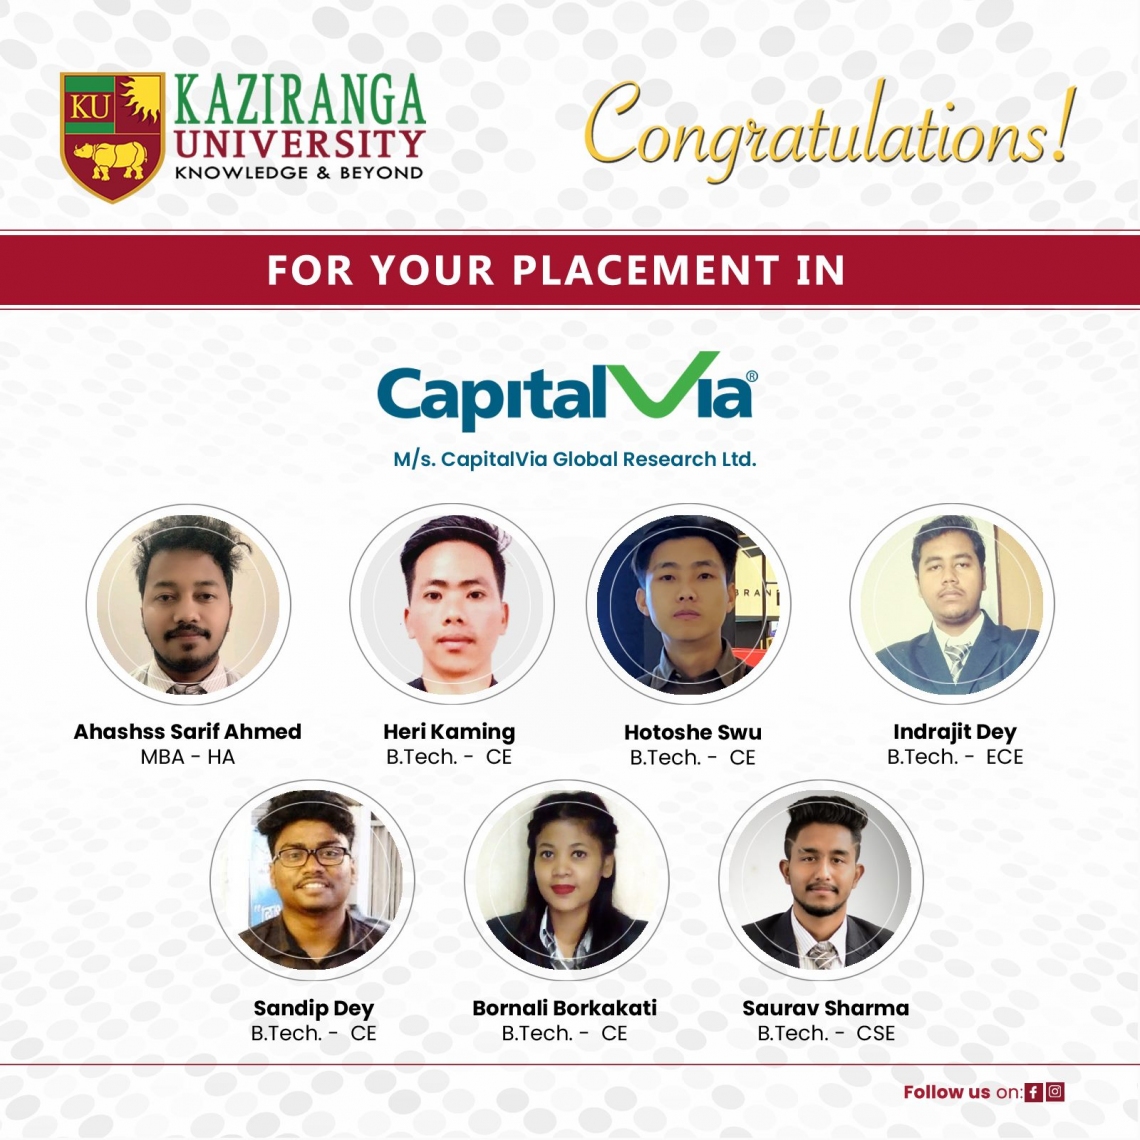 Students on being placed with M/s. CapitalVia Global Research Ltd.